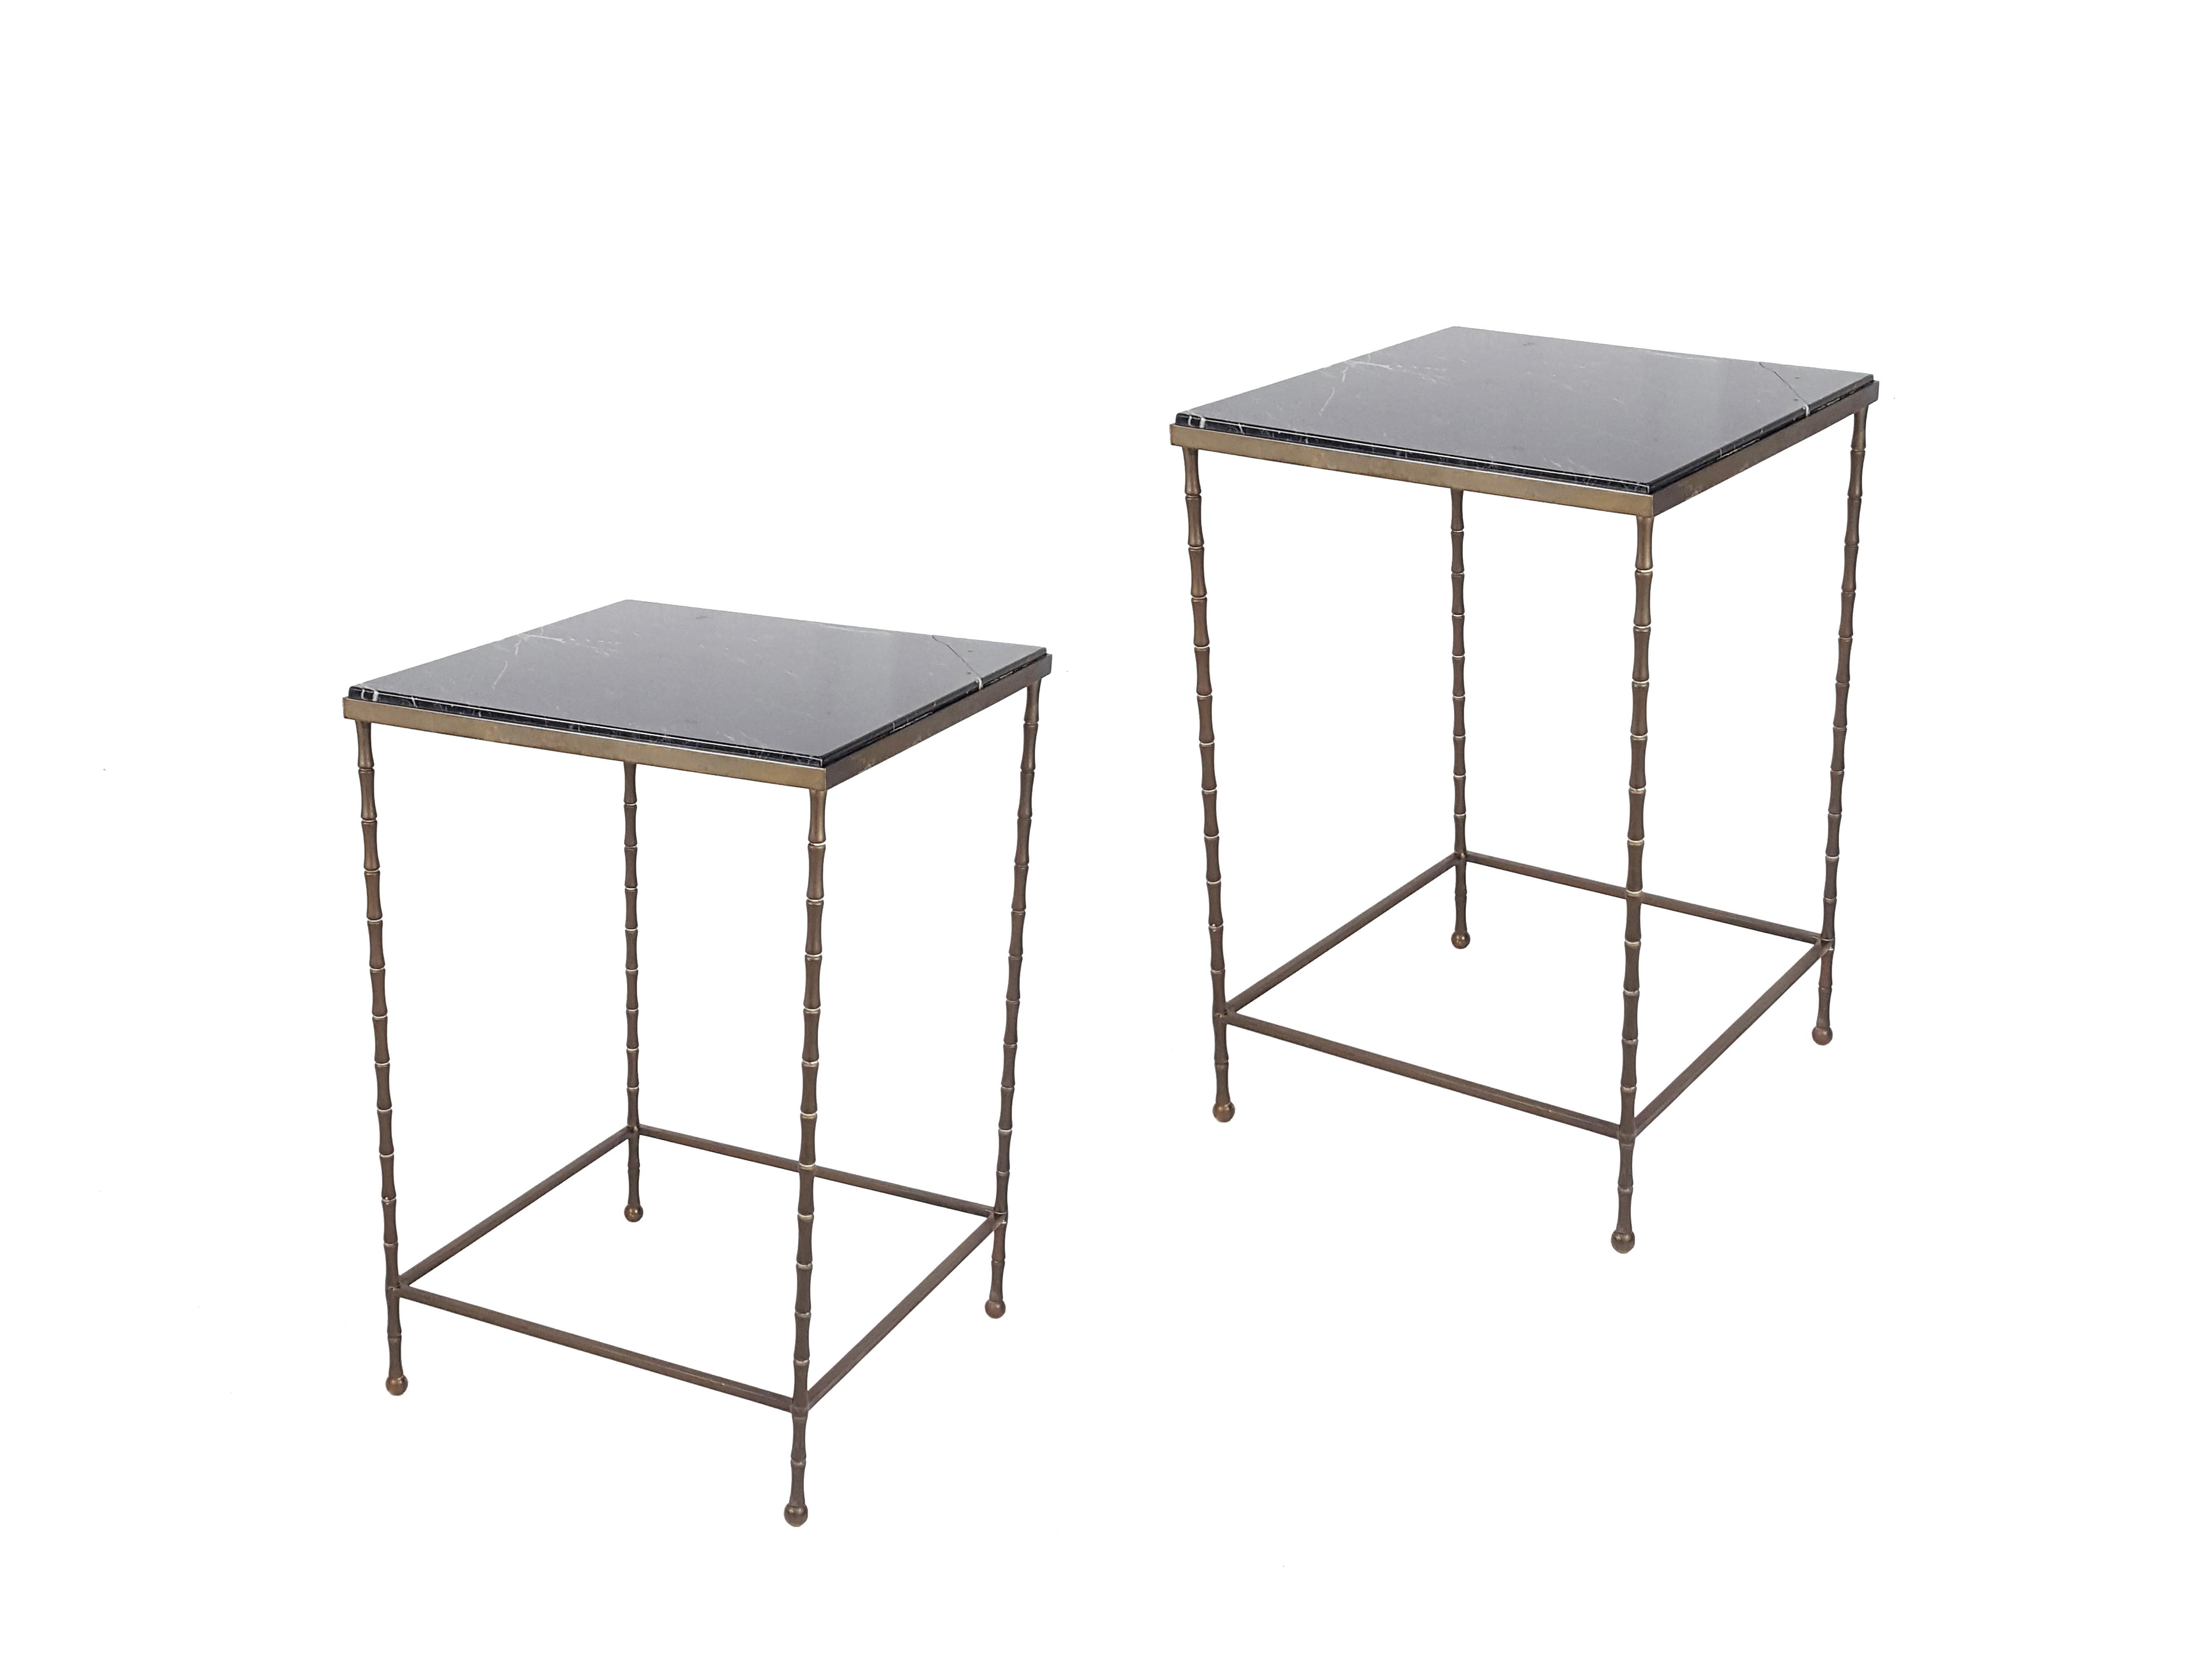 Mid-Century Modern Pair of Black Marble Top & Brass Structure 1950s Side Low Tables or Nightstands